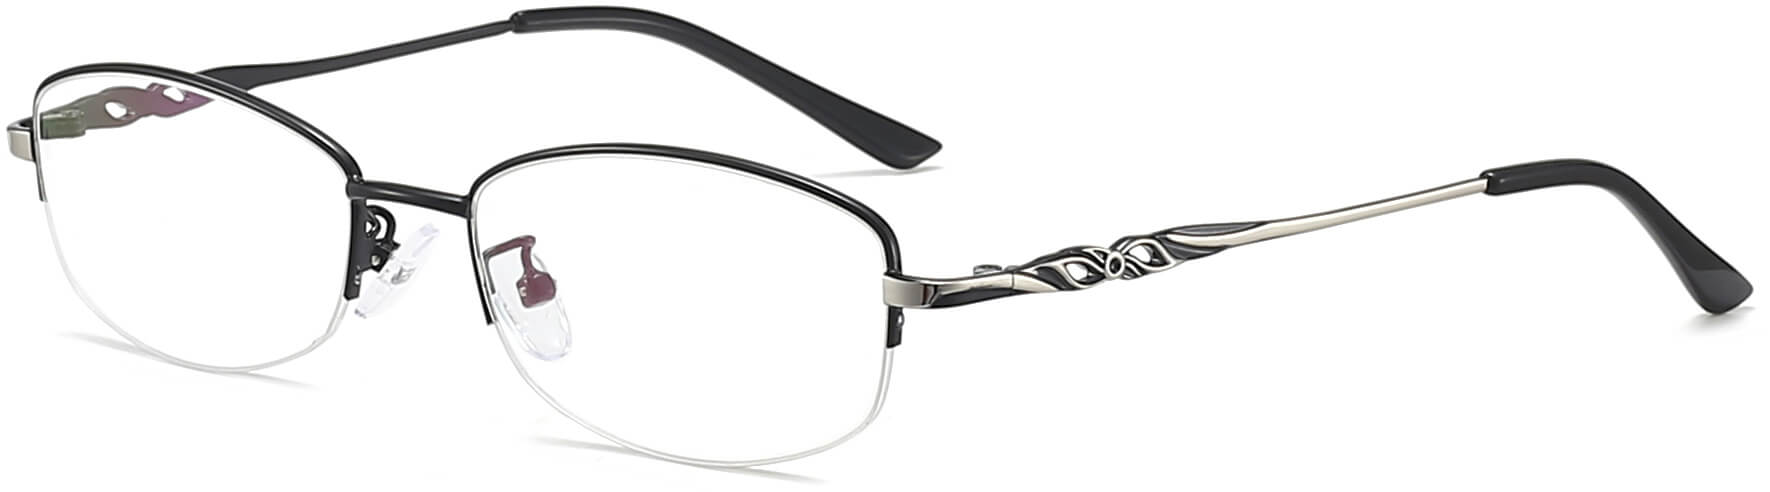 Baylee Round Black Eyeglasses from ANRRI, angle view